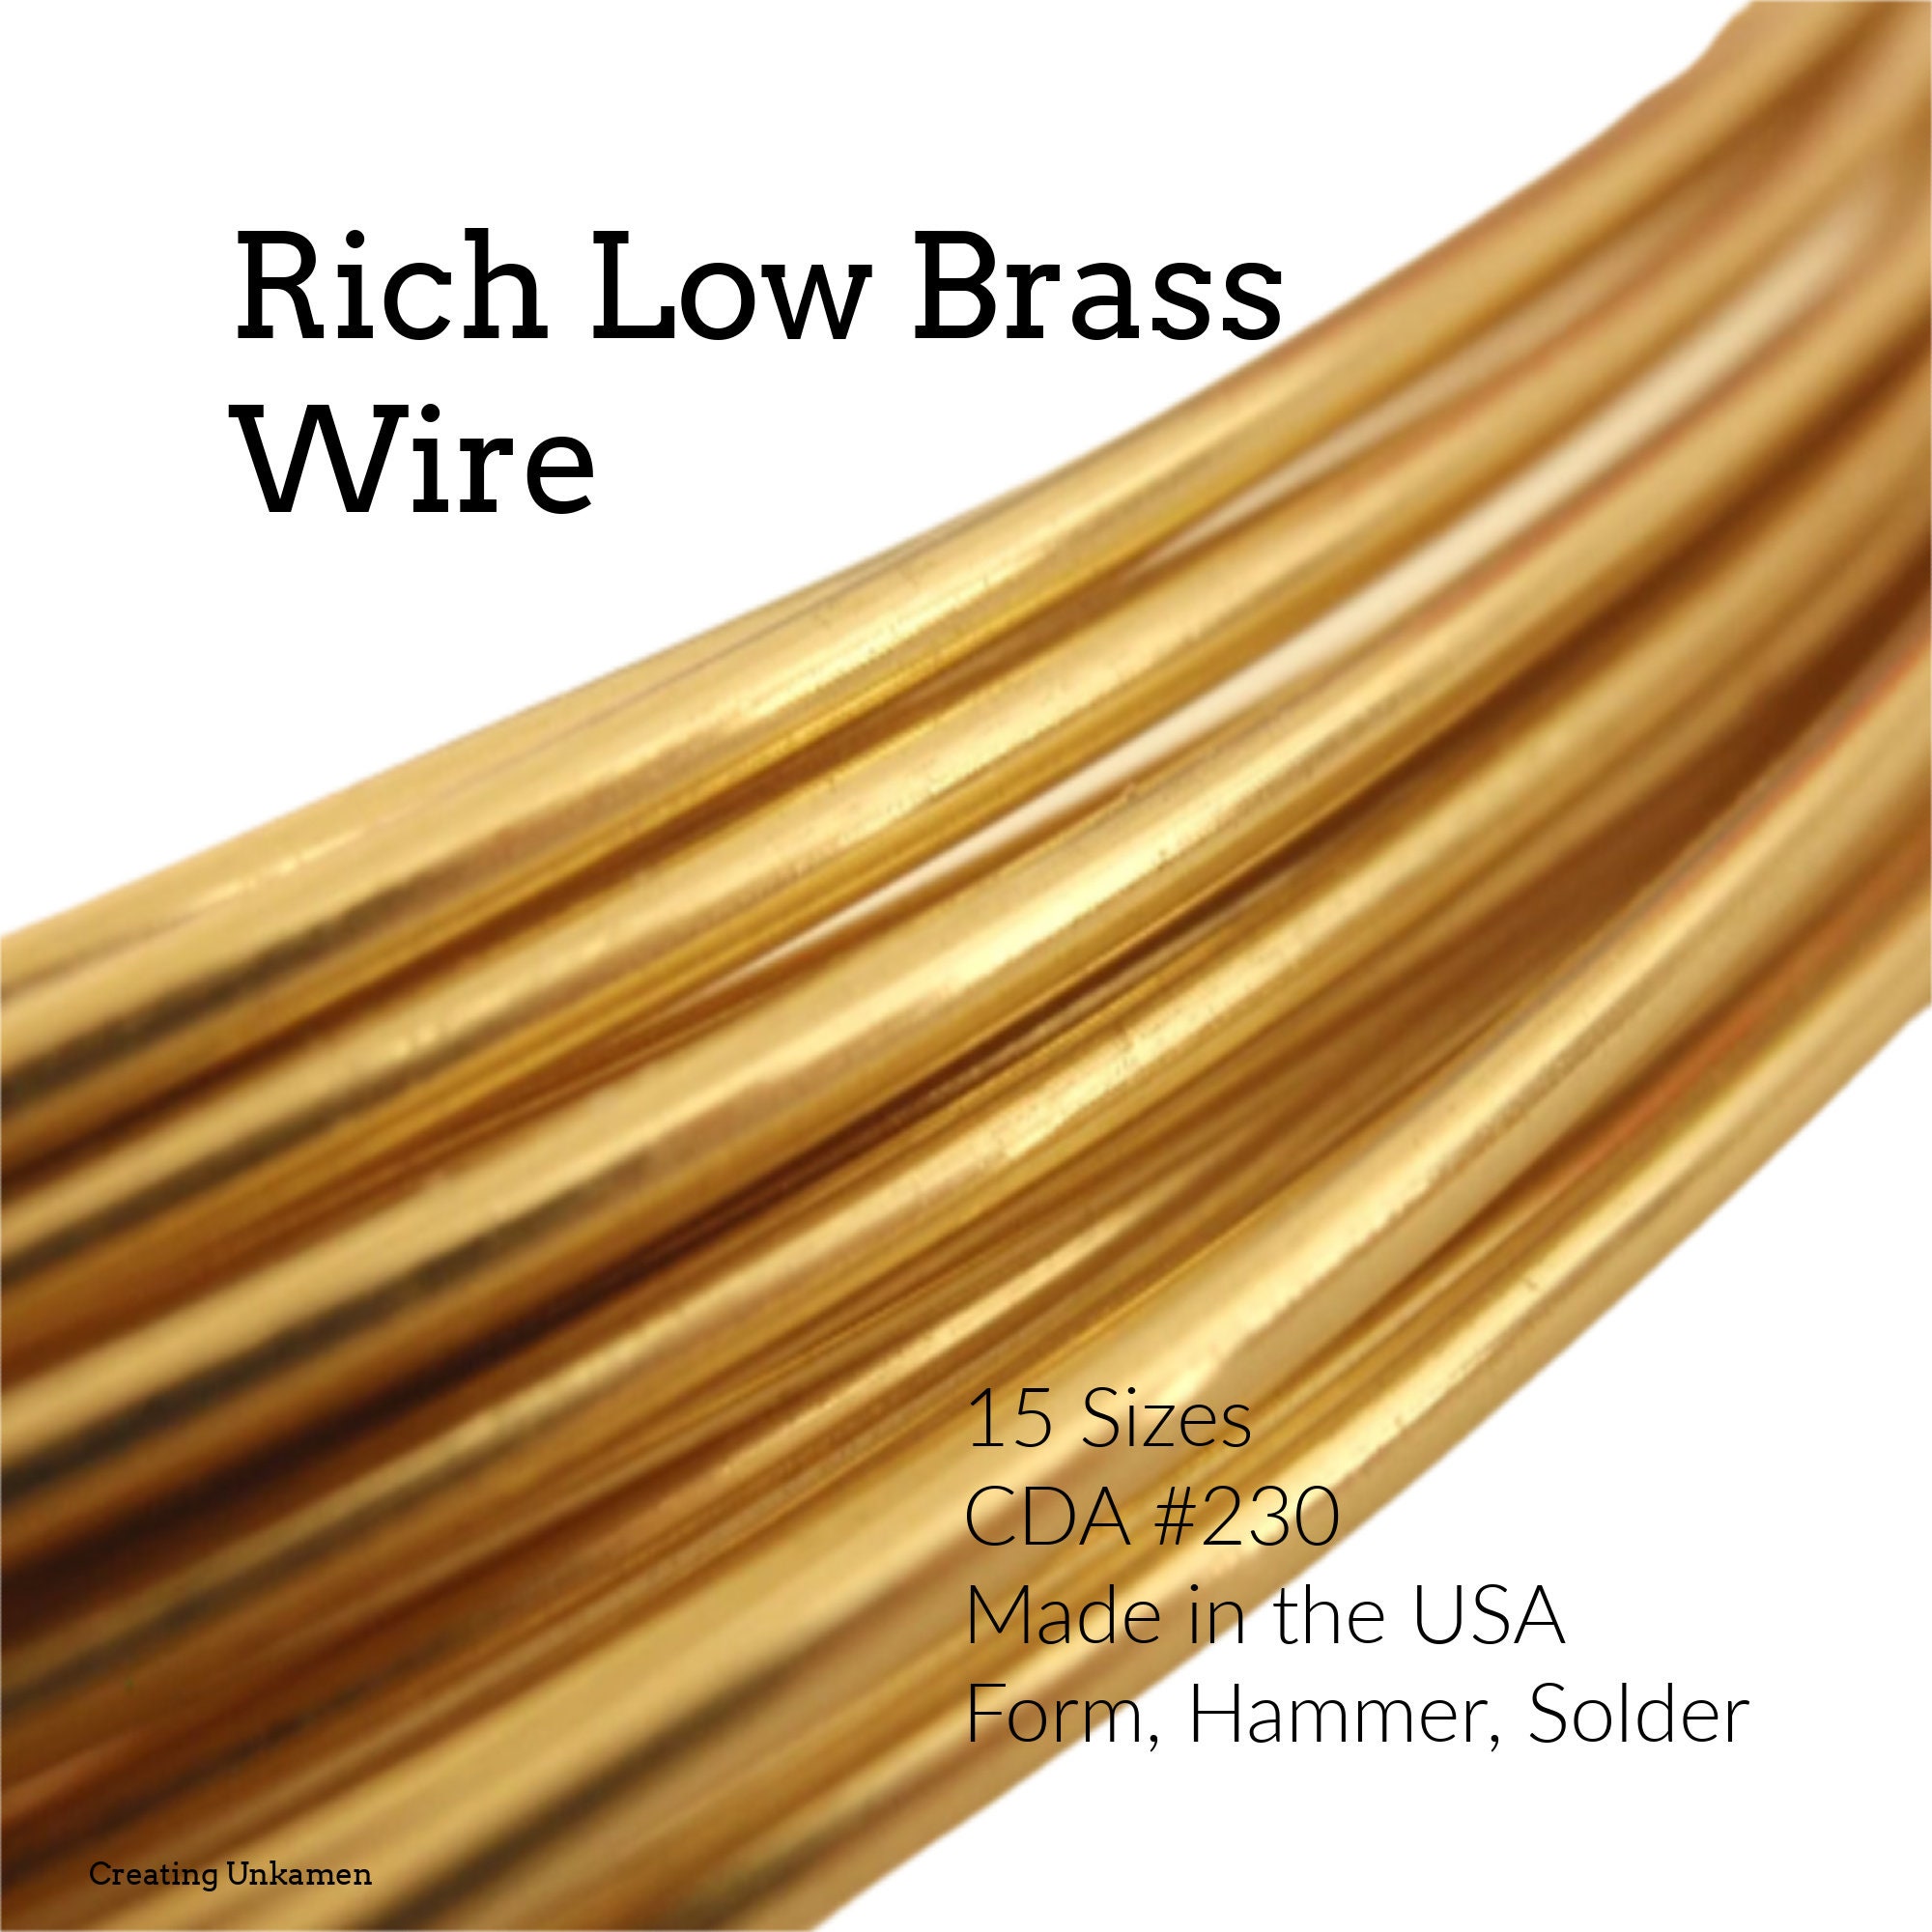 LAST CHANCE Wholesale 20 Gauge Rose Gold Copper Wire, 15 Feet Roll